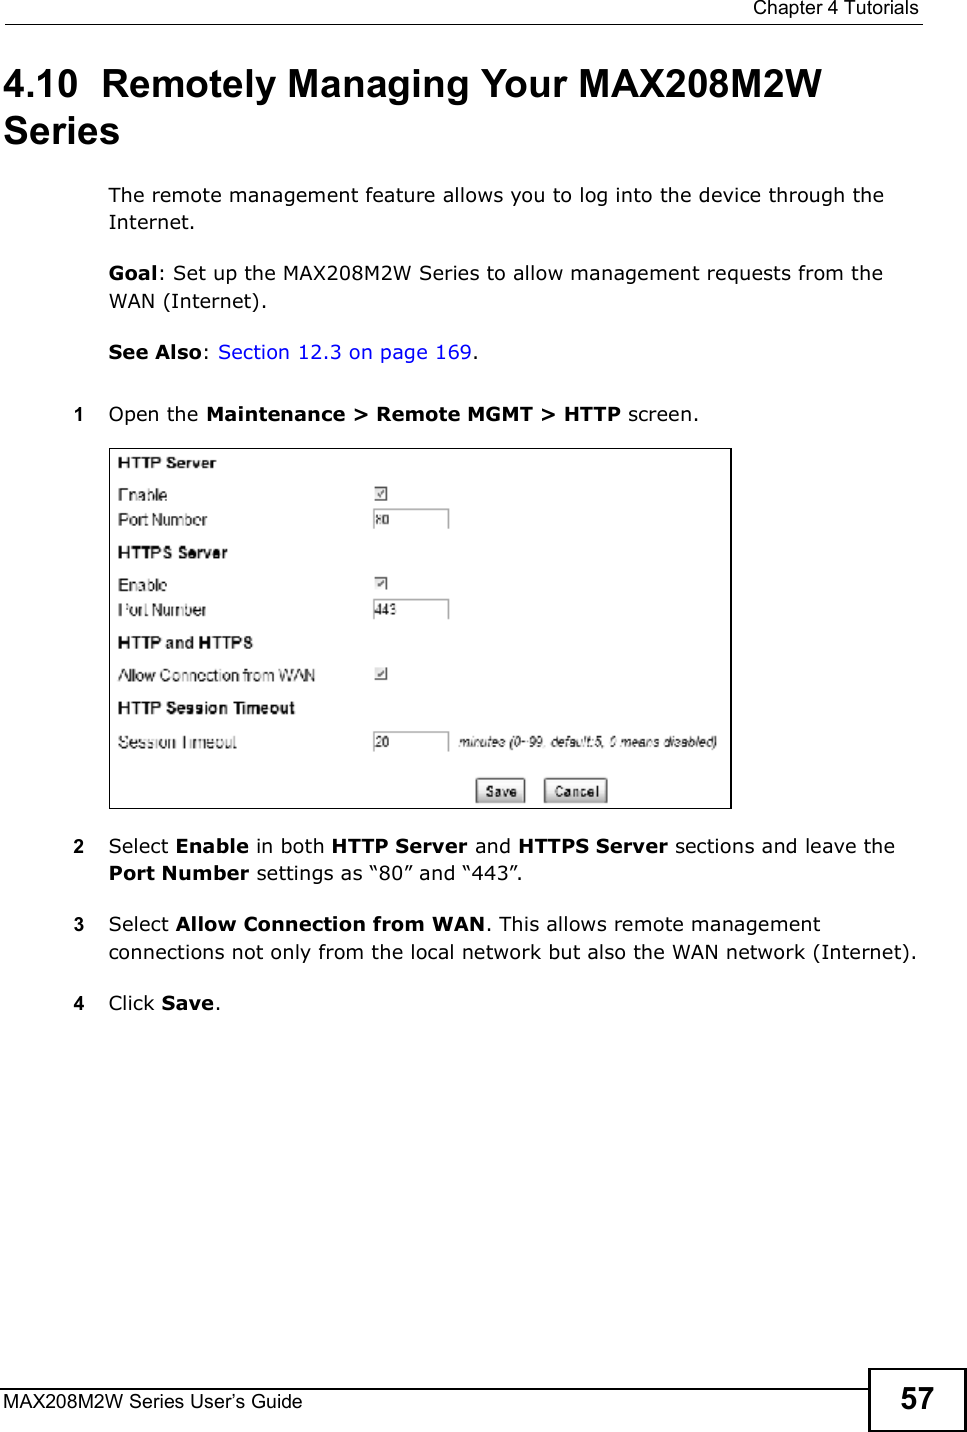  Chapter 4TutorialsMAX208M2W Series User s Guide 574.10  Remotely Managing Your MAX208M2W SeriesThe remote management feature allows you to log into the device through the Internet.Goal: Set up the MAX208M2W Series to allow management requests from the WAN (Internet).See Also: Section 12.3 on page 169.1Open the Maintenance &gt; Remote MGMT &gt; HTTP screen.2Select Enable in both HTTP Server and HTTPS Server sections and leave the Port Number settings as &quot;80# and &quot;443#.3Select Allow Connection from WAN. This allows remote management connections not only from the local network but also the WAN network (Internet).4Click Save.